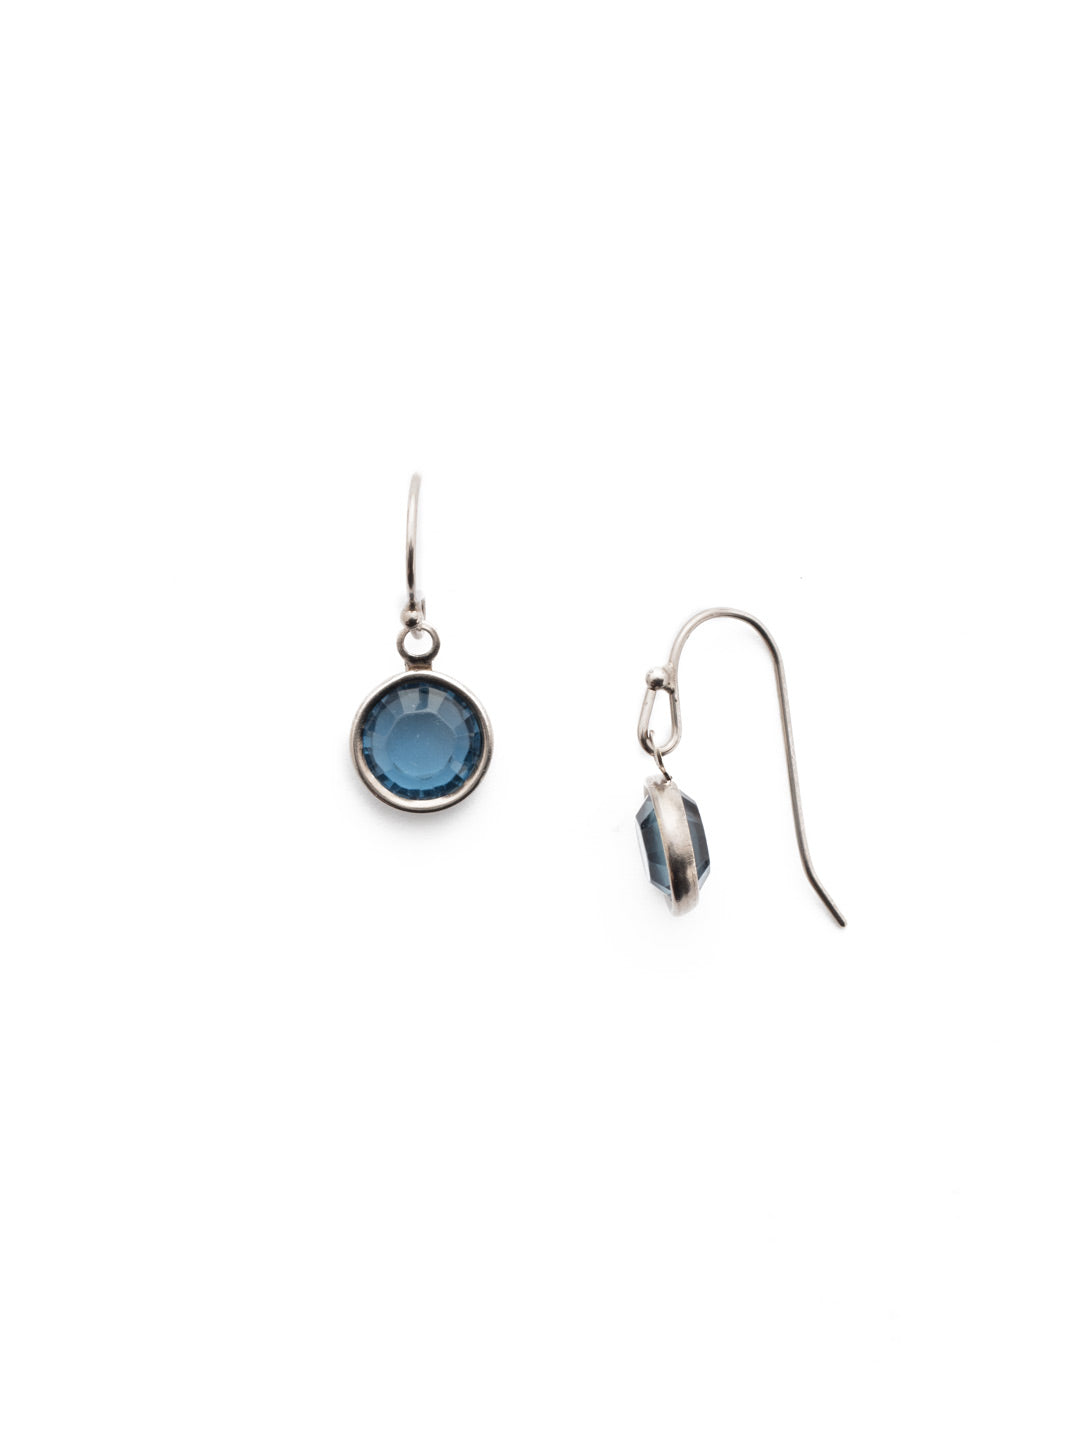 Dewdrop Dangle Earring - EEF73ASNFT - A drop of sparkle is always in style. Add a touch with this pair of drop earrings. From Sorrelli's Night Frost collection in our Antique Silver-tone finish.